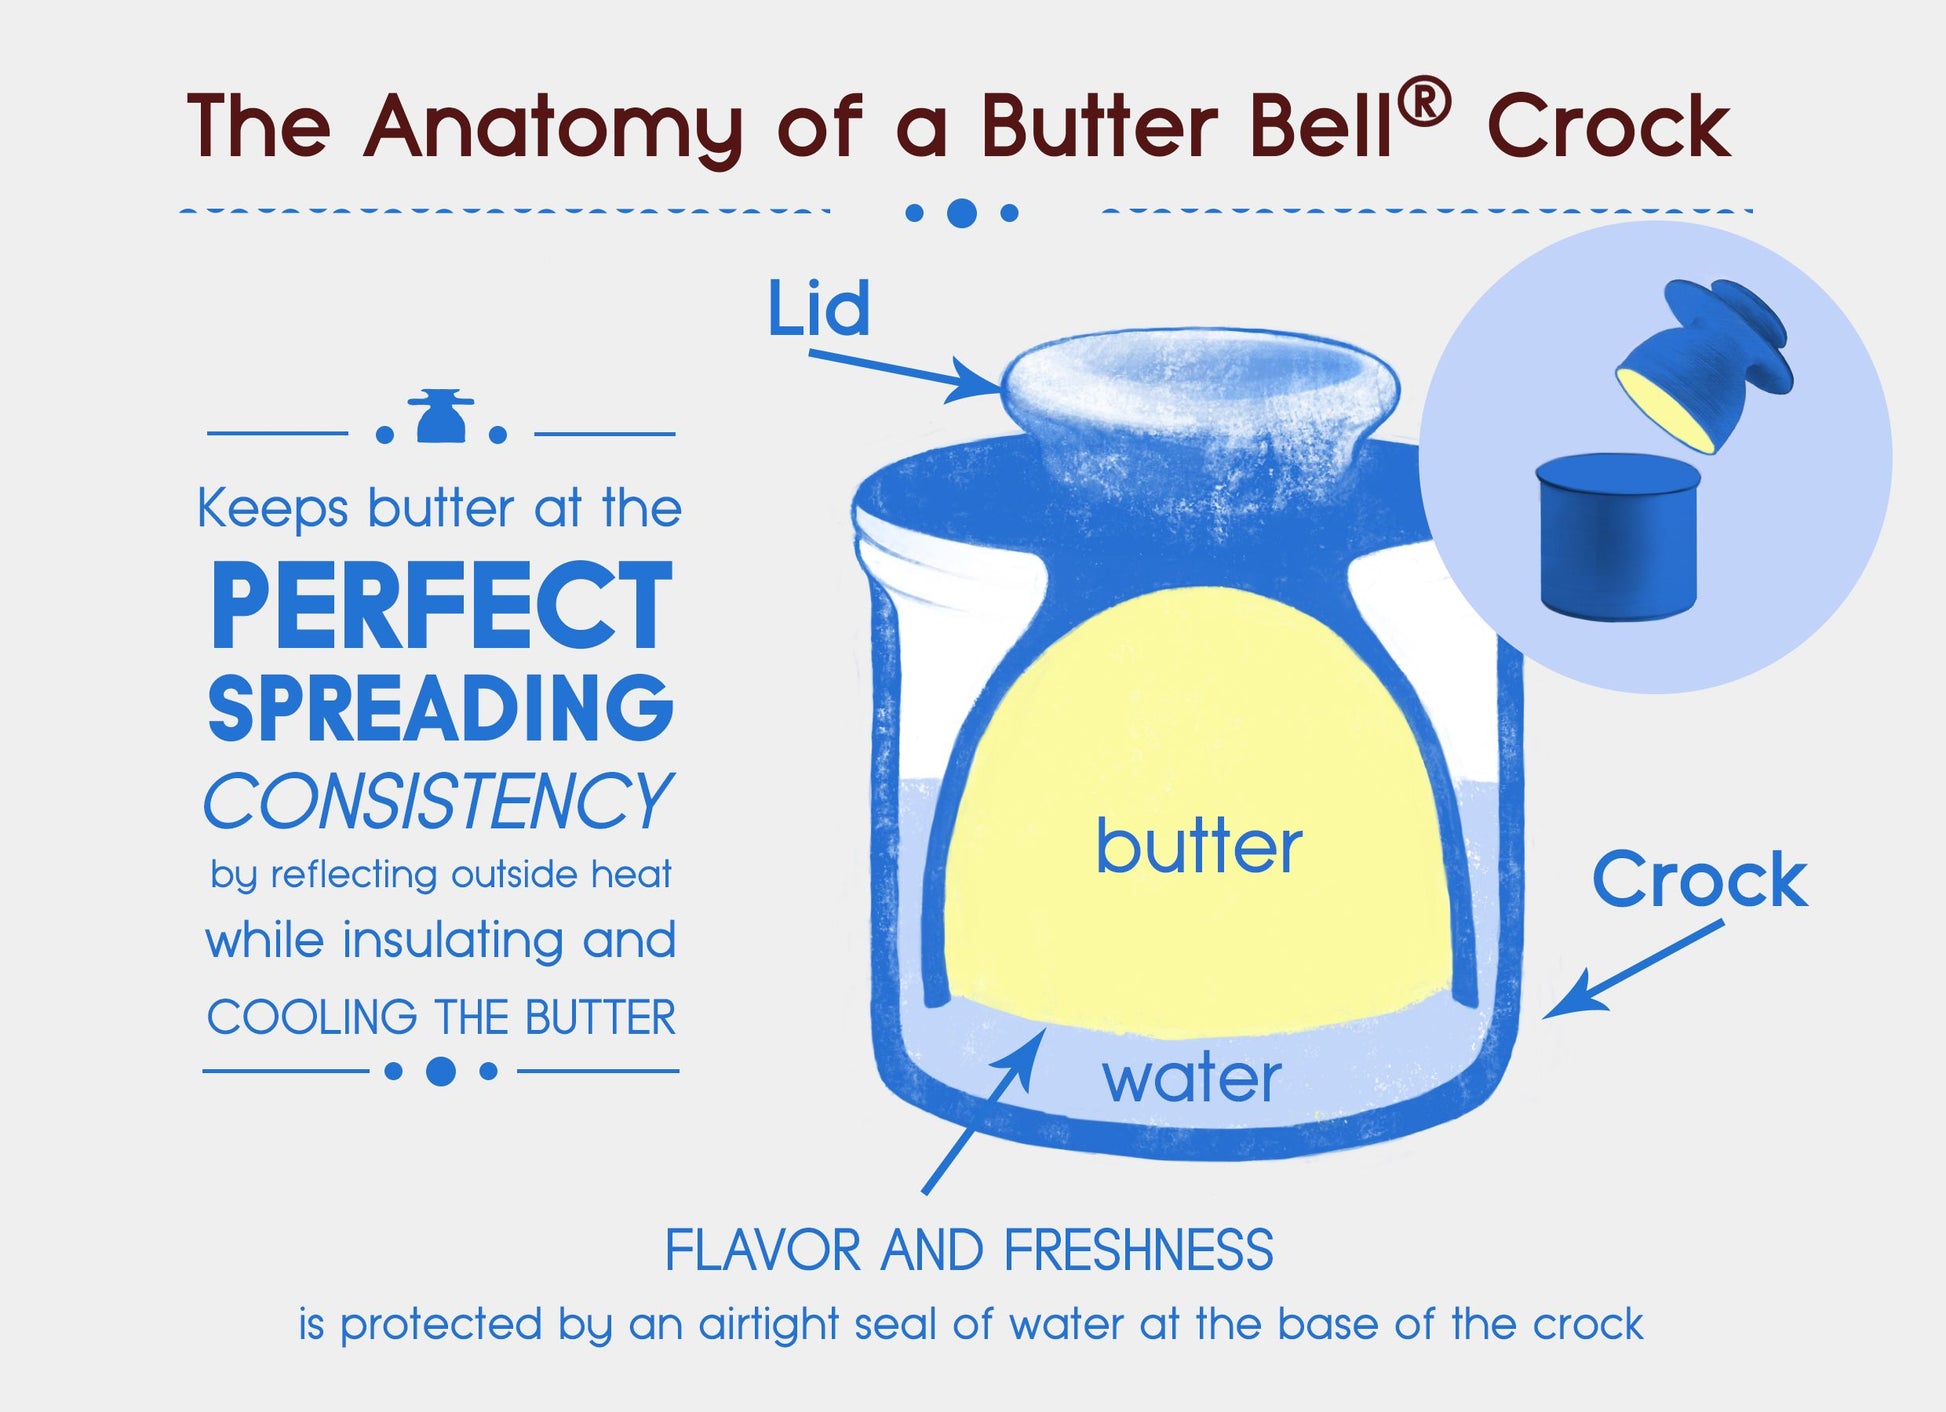 a chart showing the anatomy of a butter bell crock and how it works.